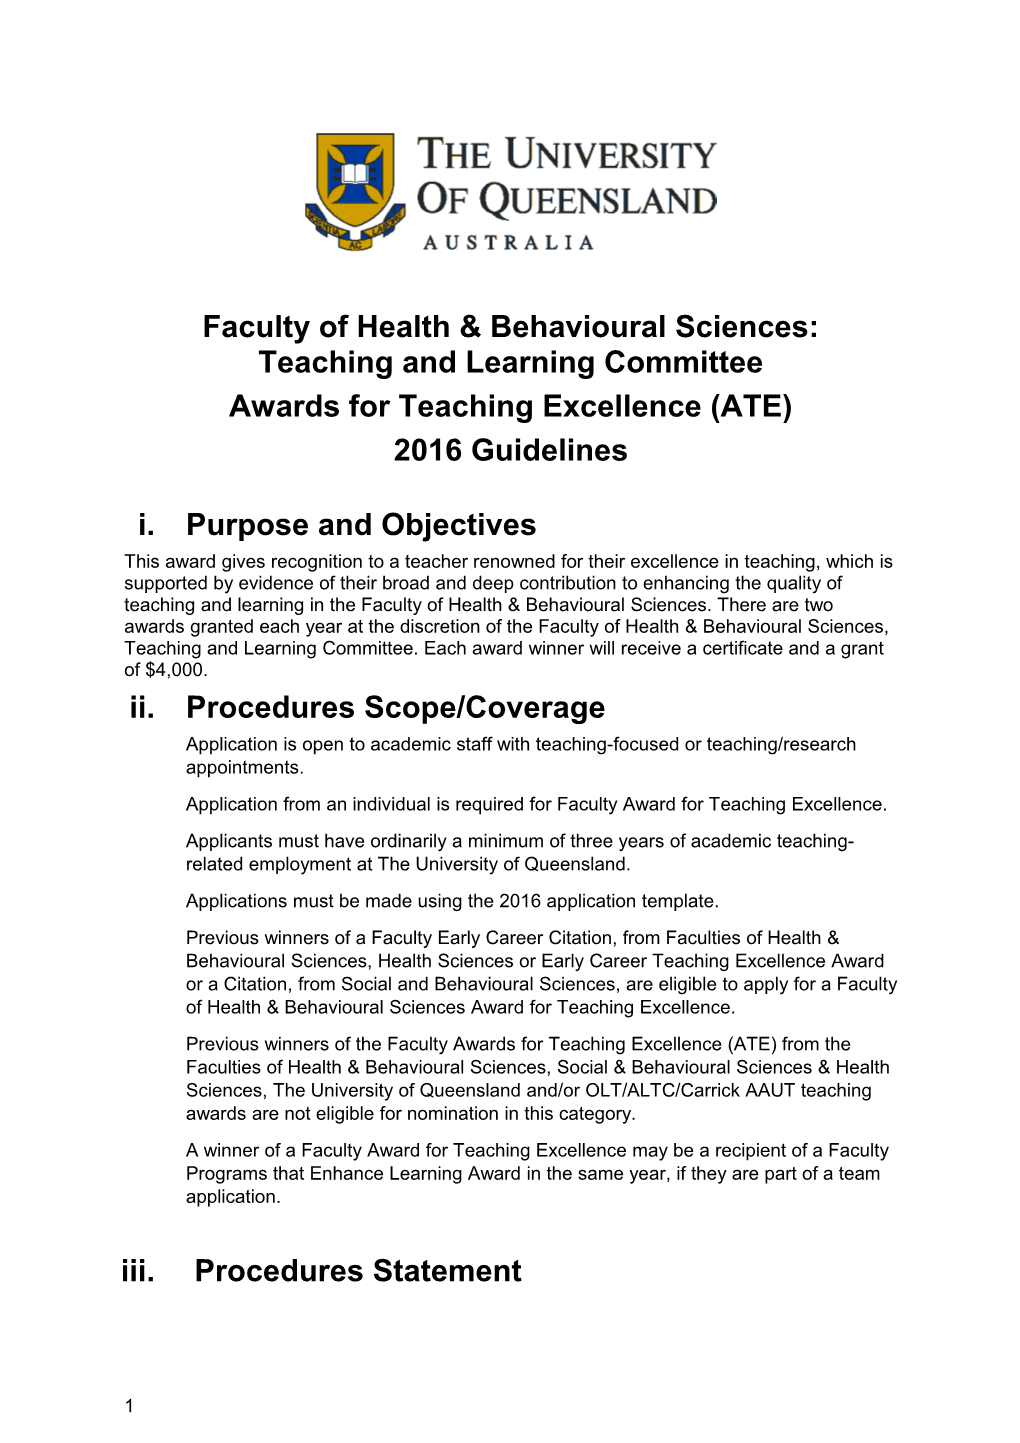 Awards for Teaching Excellence (ATE)